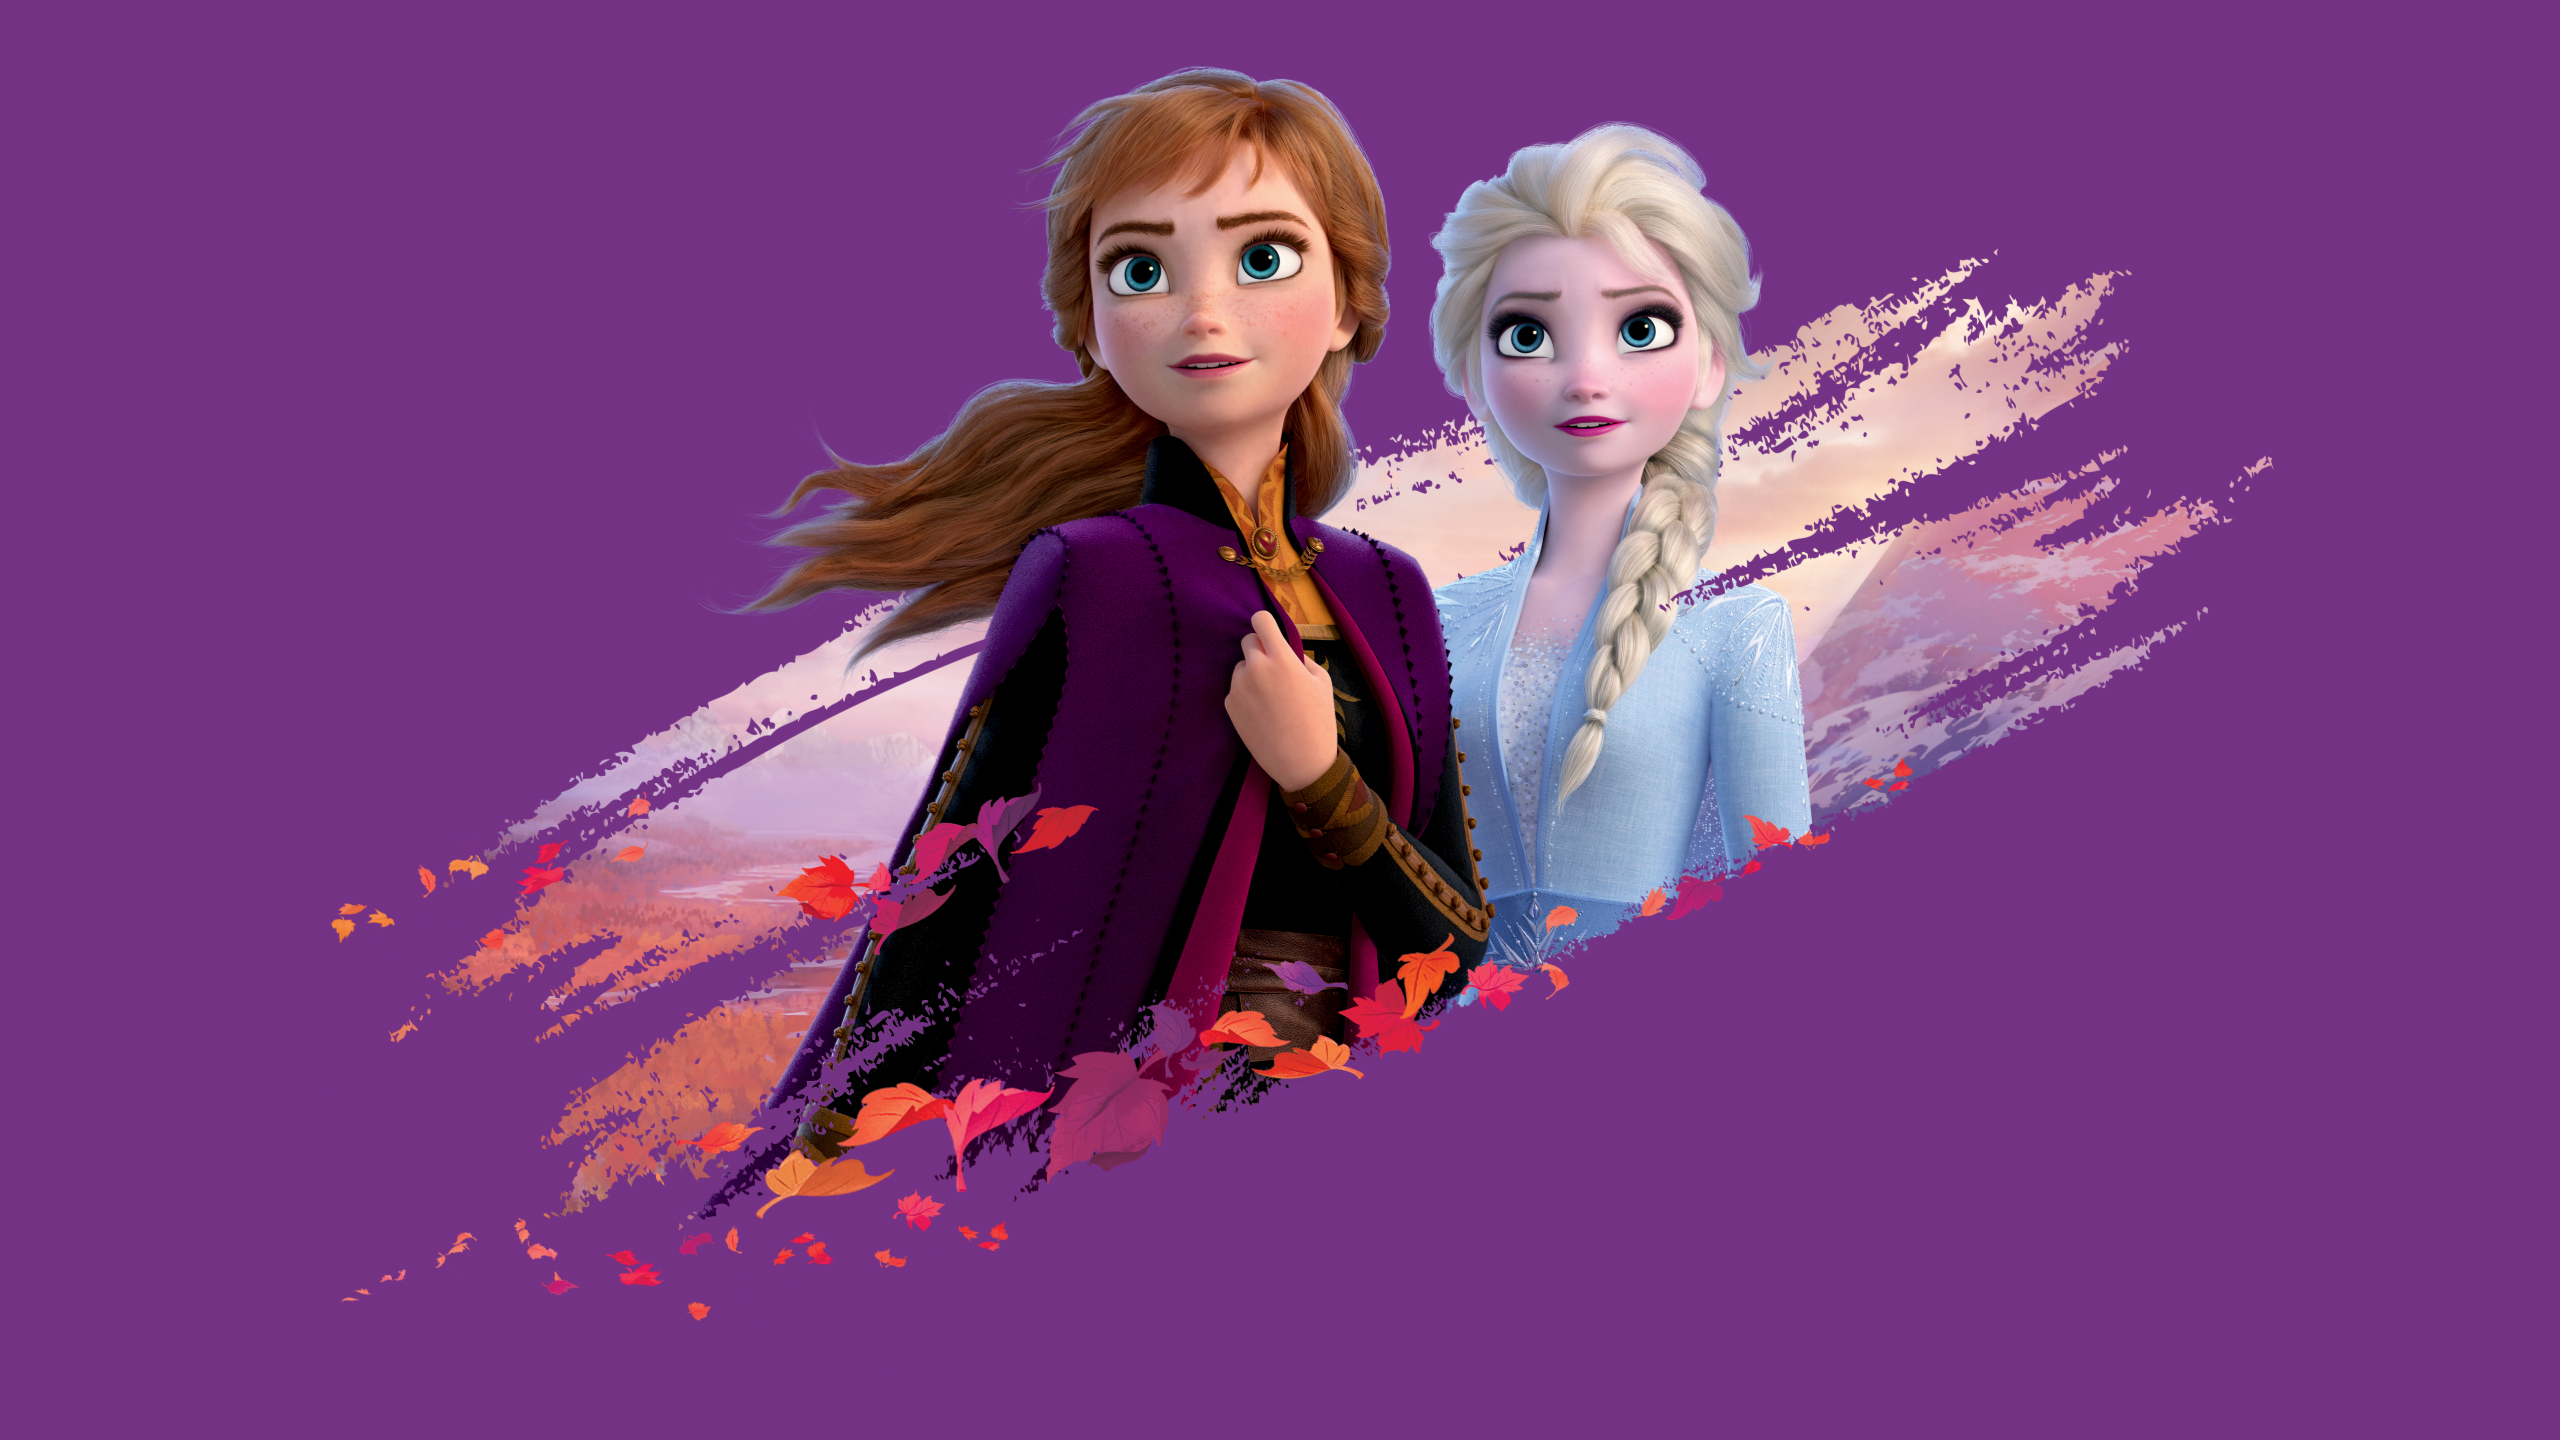 Frozen download the new